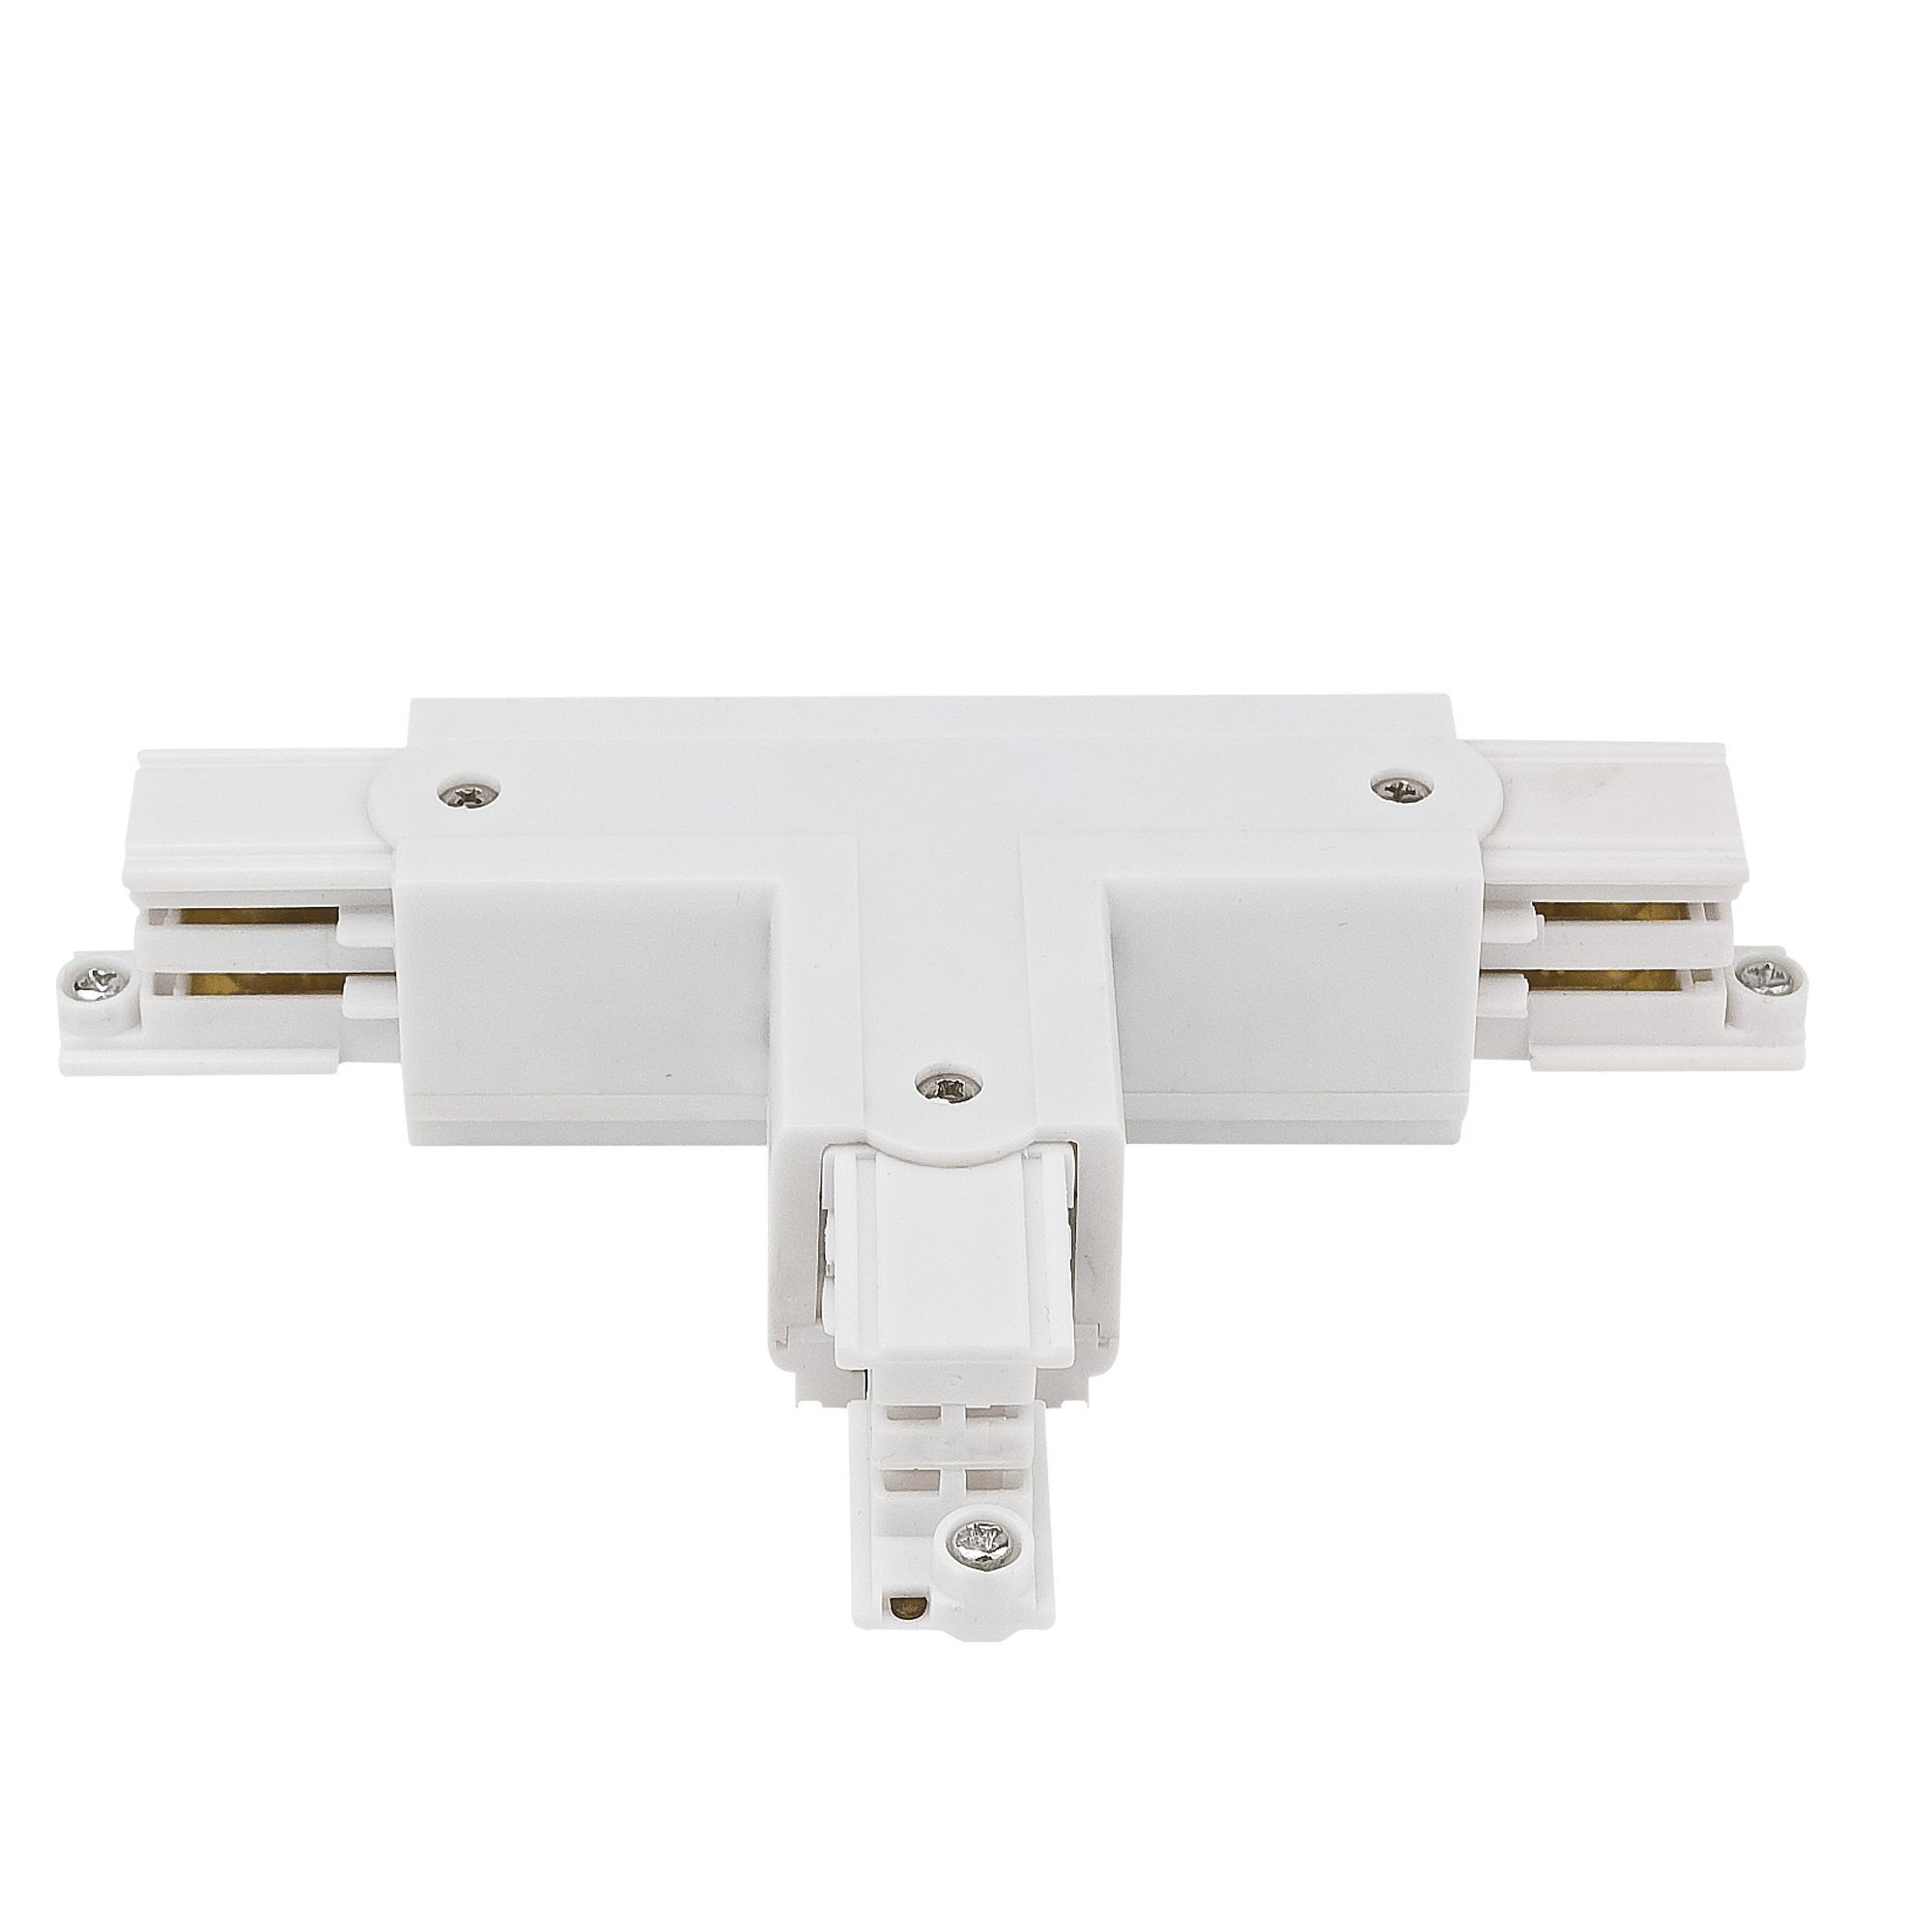 3-Phase Right T-Connector - Onlinediscowinkel.nl